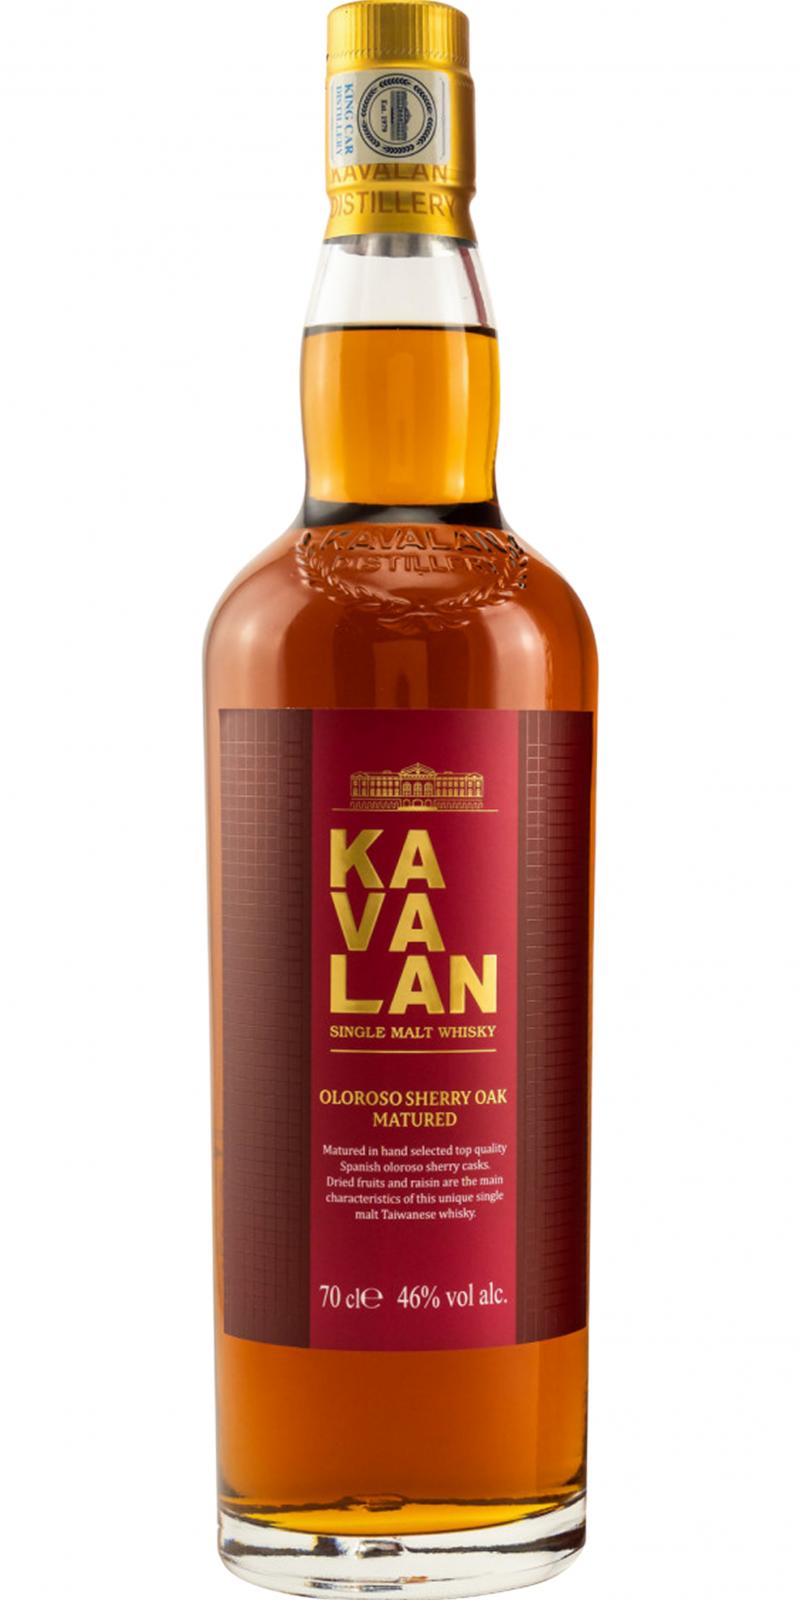 Kavalan Oloroso Sherry Oak Matured - Value and price information